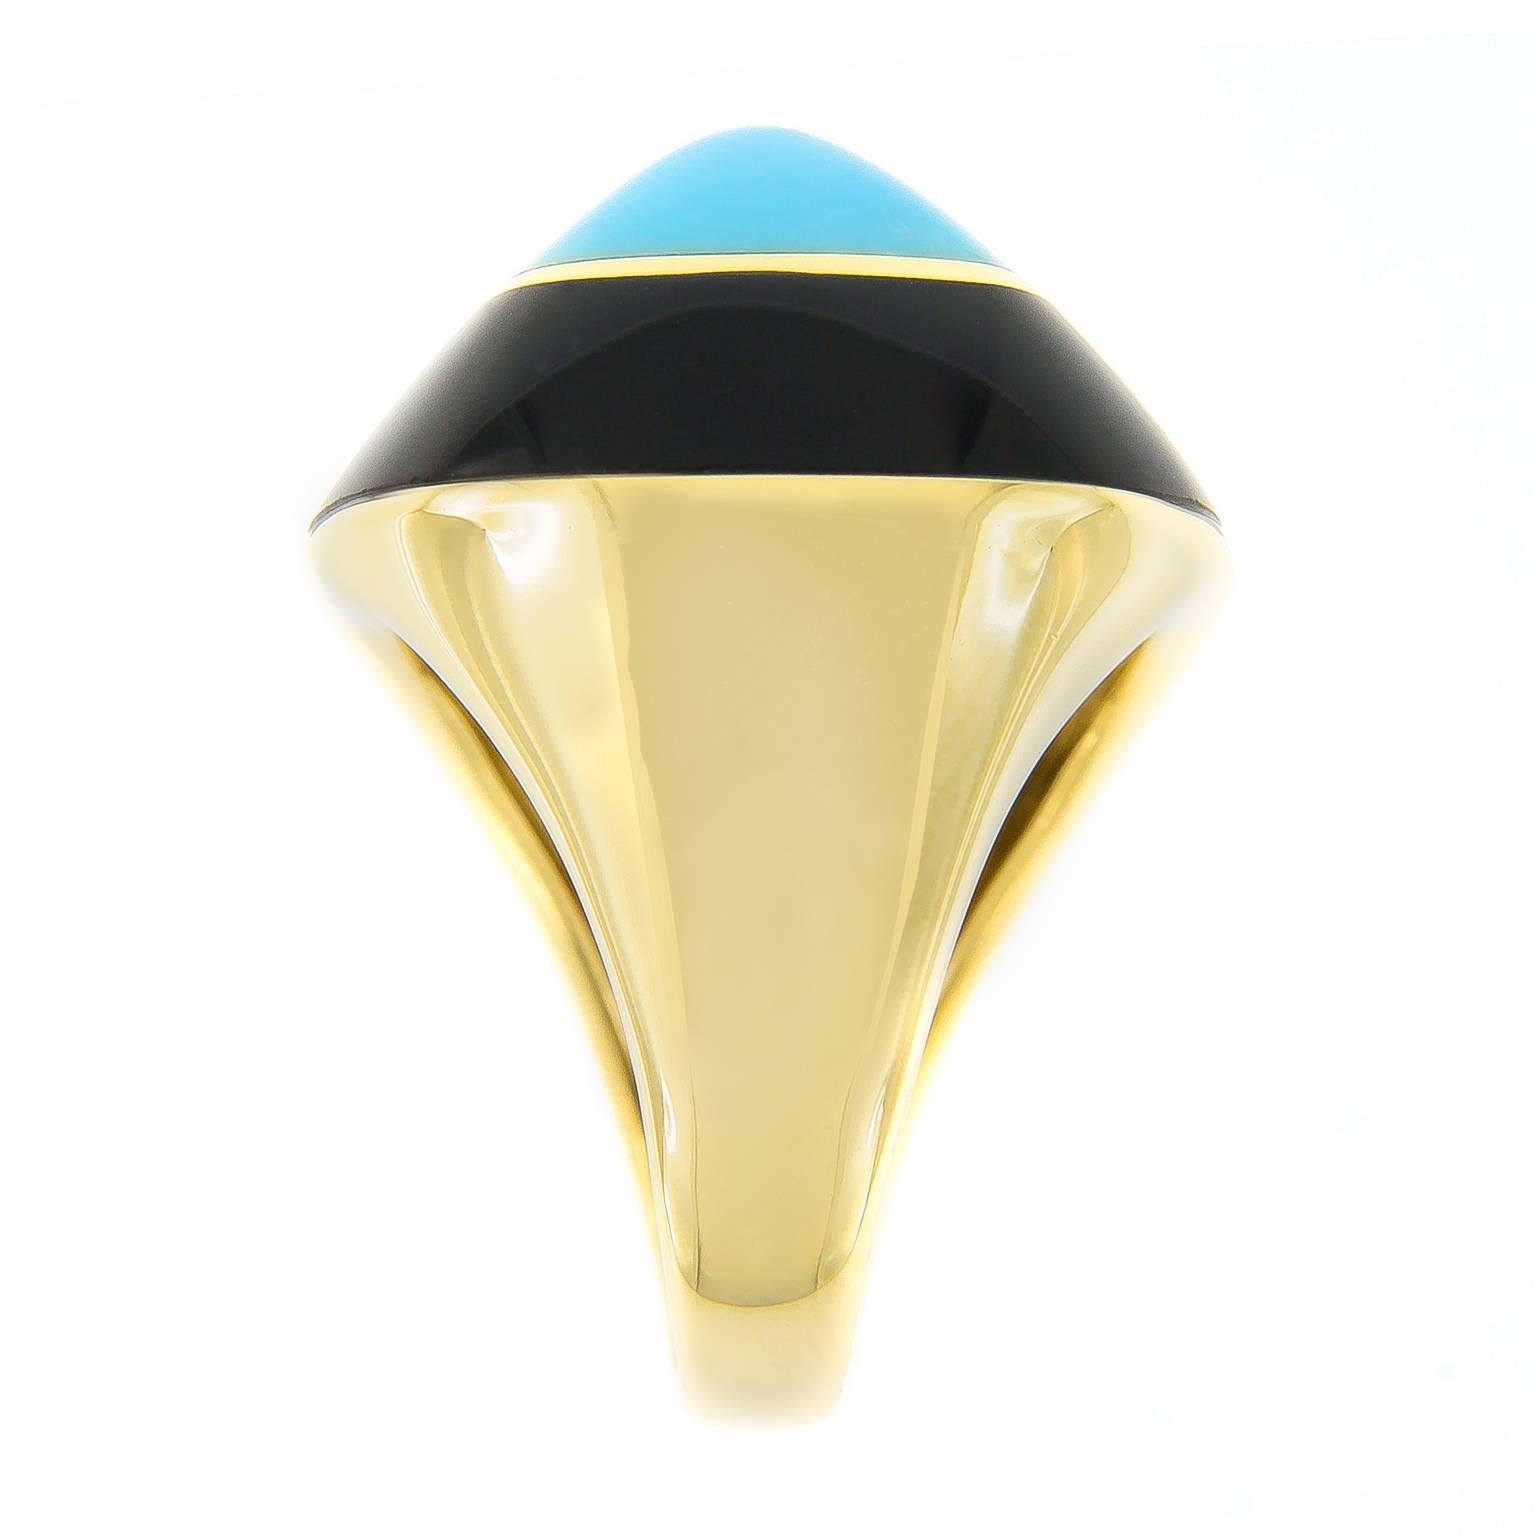 Make a bold statement with this fabulous 18k yellow gold ring made for Campanelli & Pear by Molina. Retro in style, this pyramidal ring features a Persian Turquoise center stone 1.87 carat surrounded by a band of black onyx.
18KYG
Hallmarked